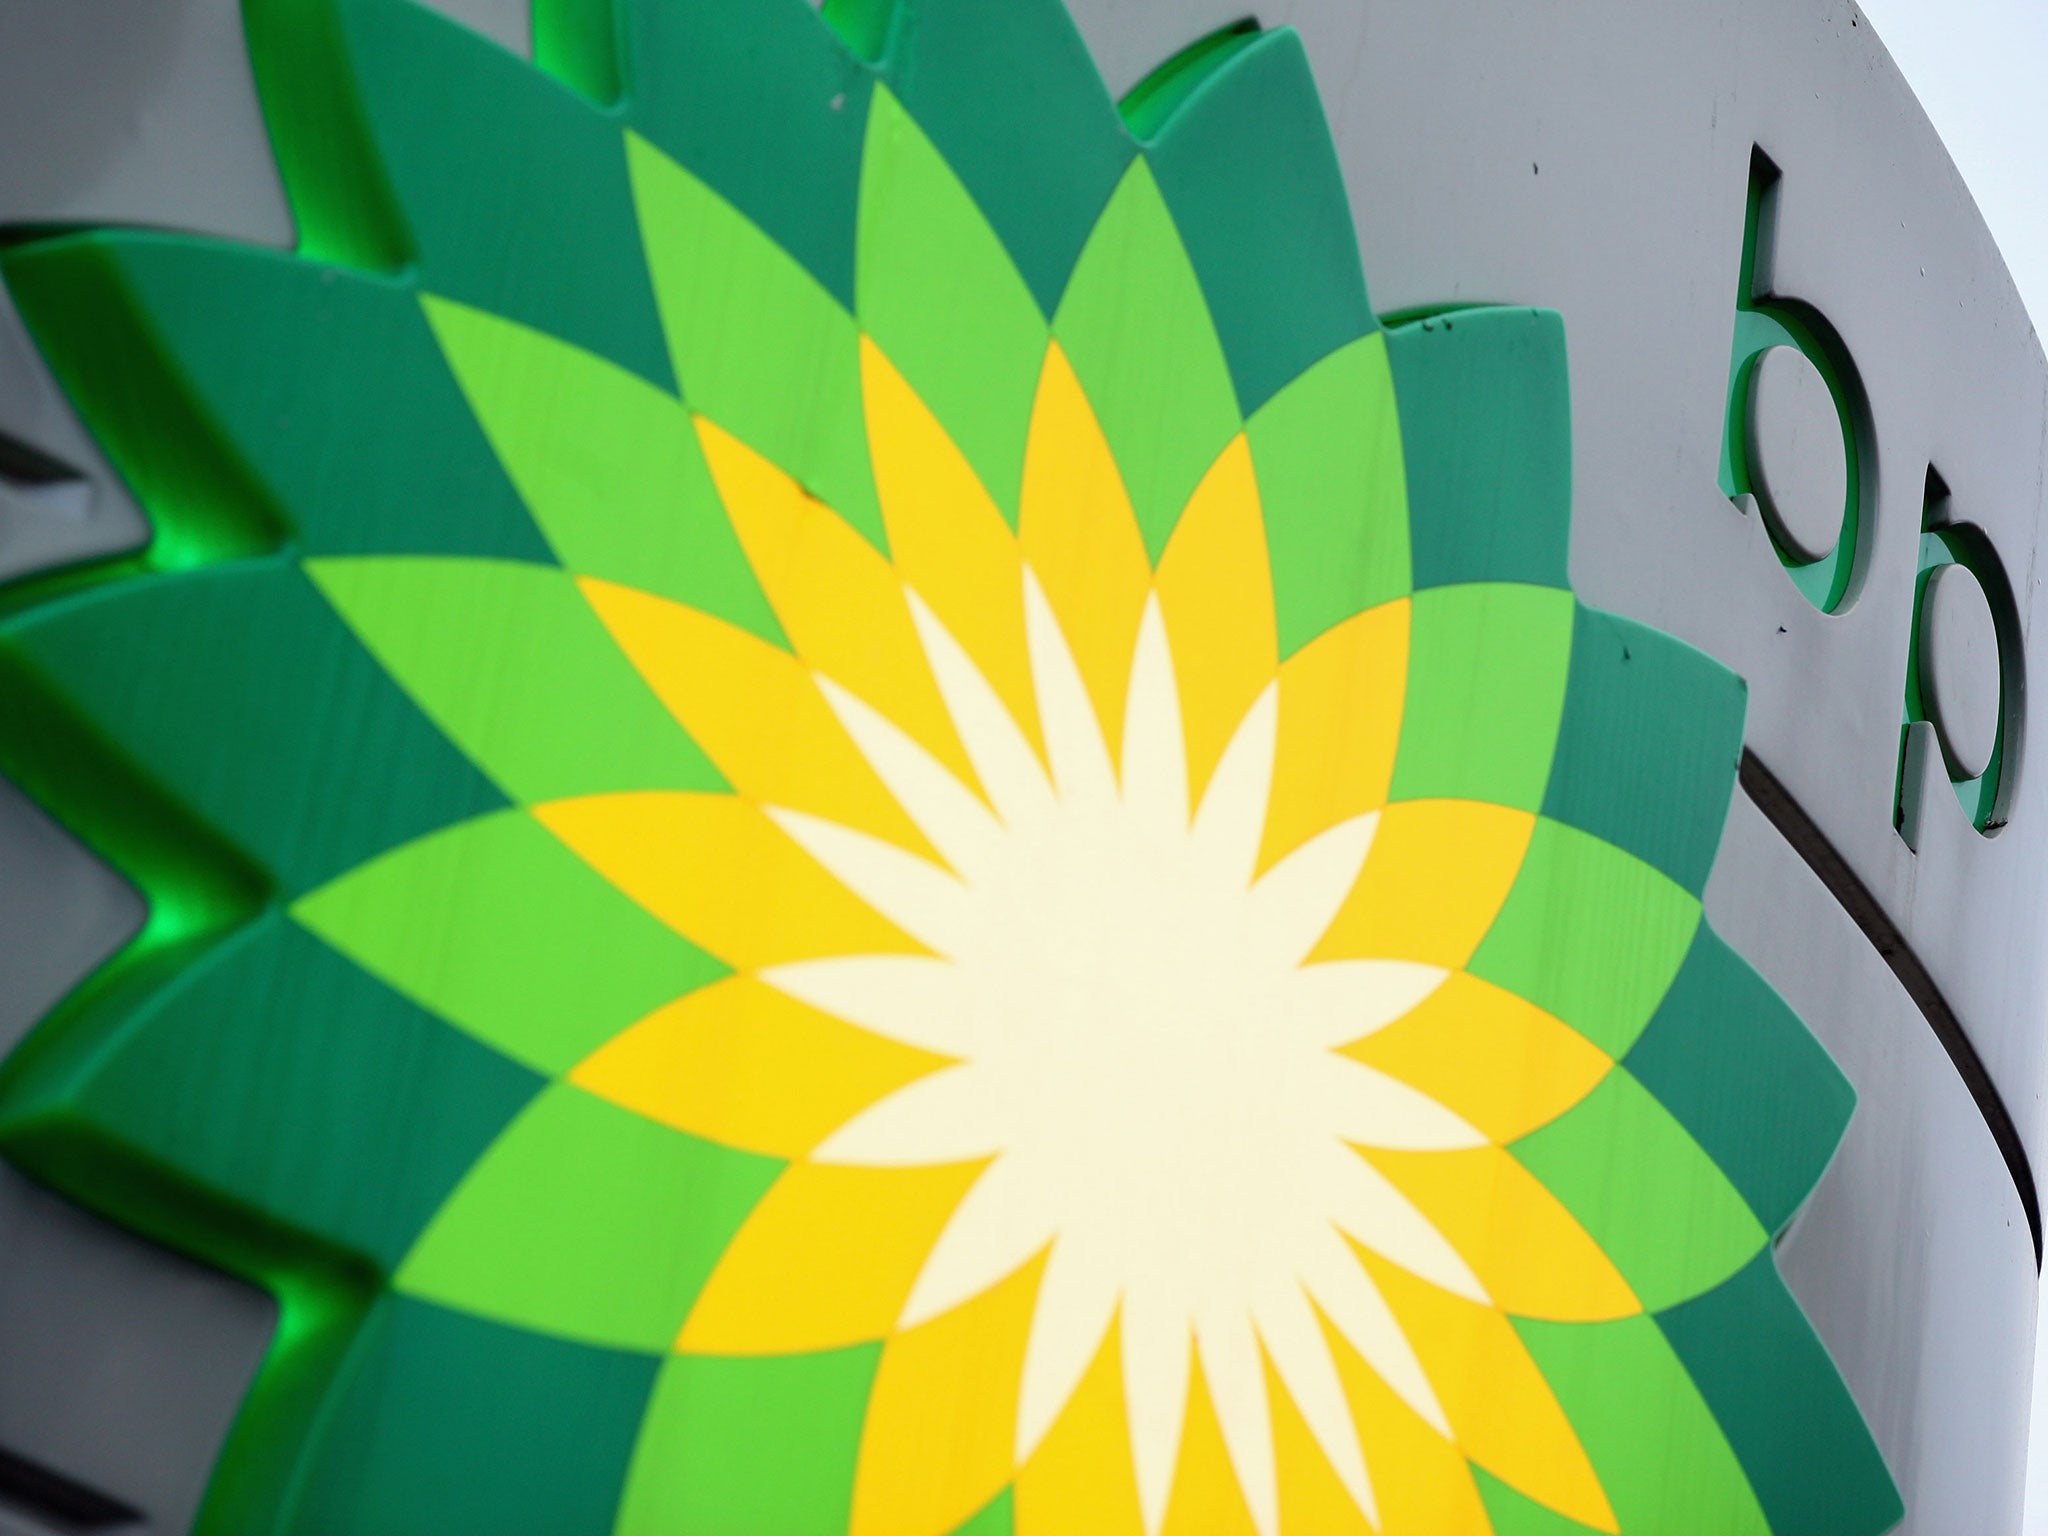 Like fellow oil companies, BP has been hit by plummeting oil prices, but has also had to deal with $55 billion in costs from the oil spill in the Gulf of Mexico